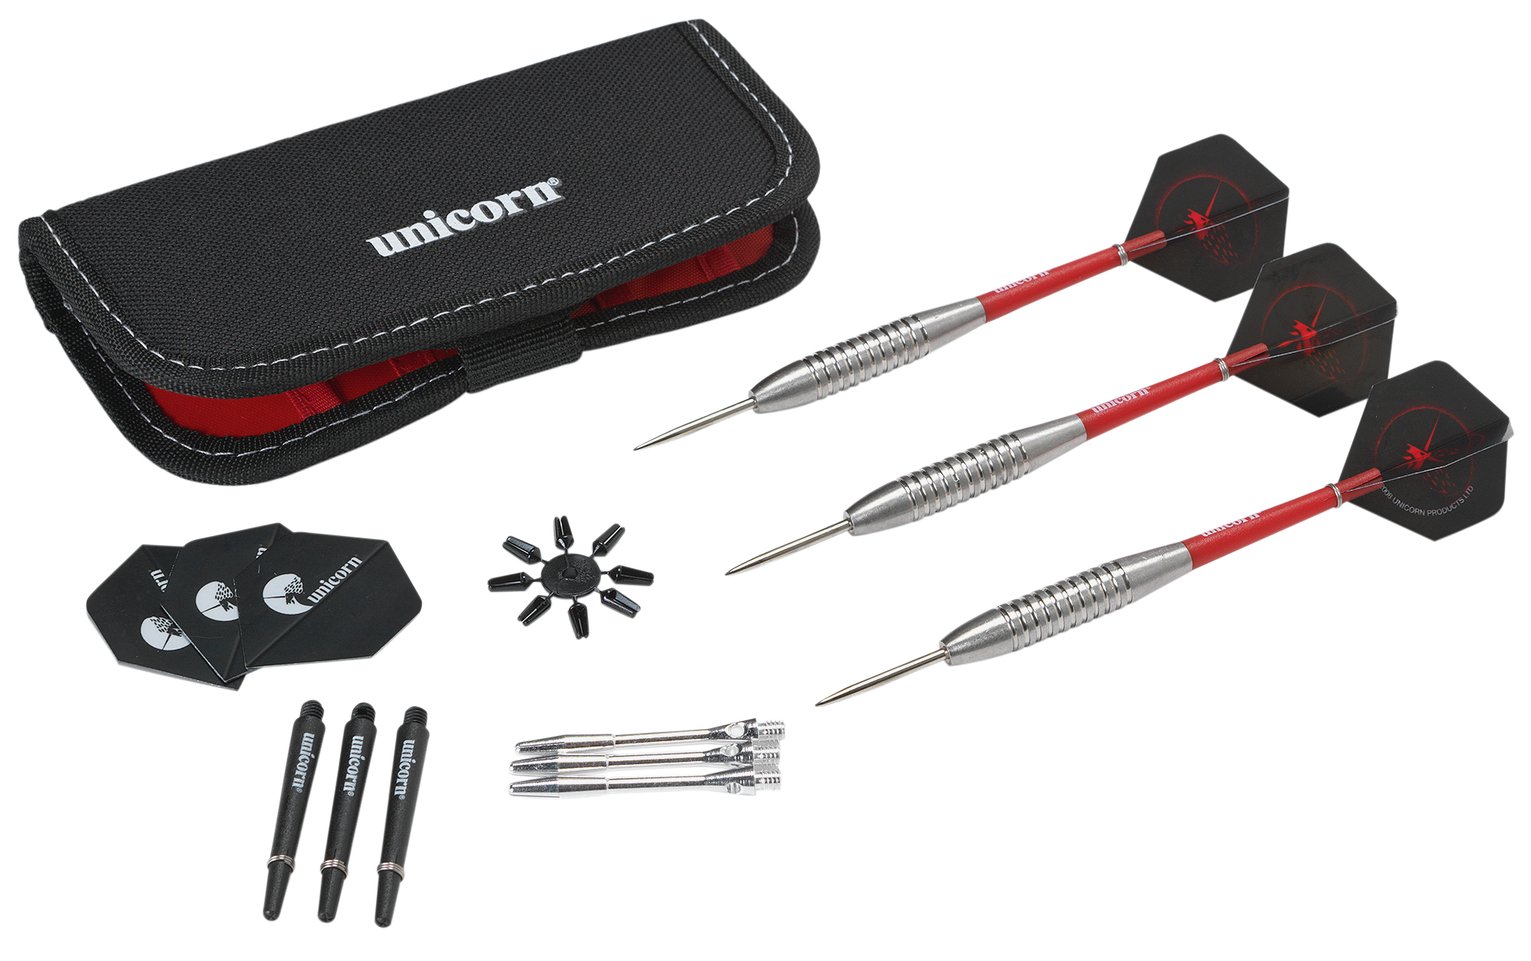 Unicorn ST65 23g Stainless Steel Darts Set review